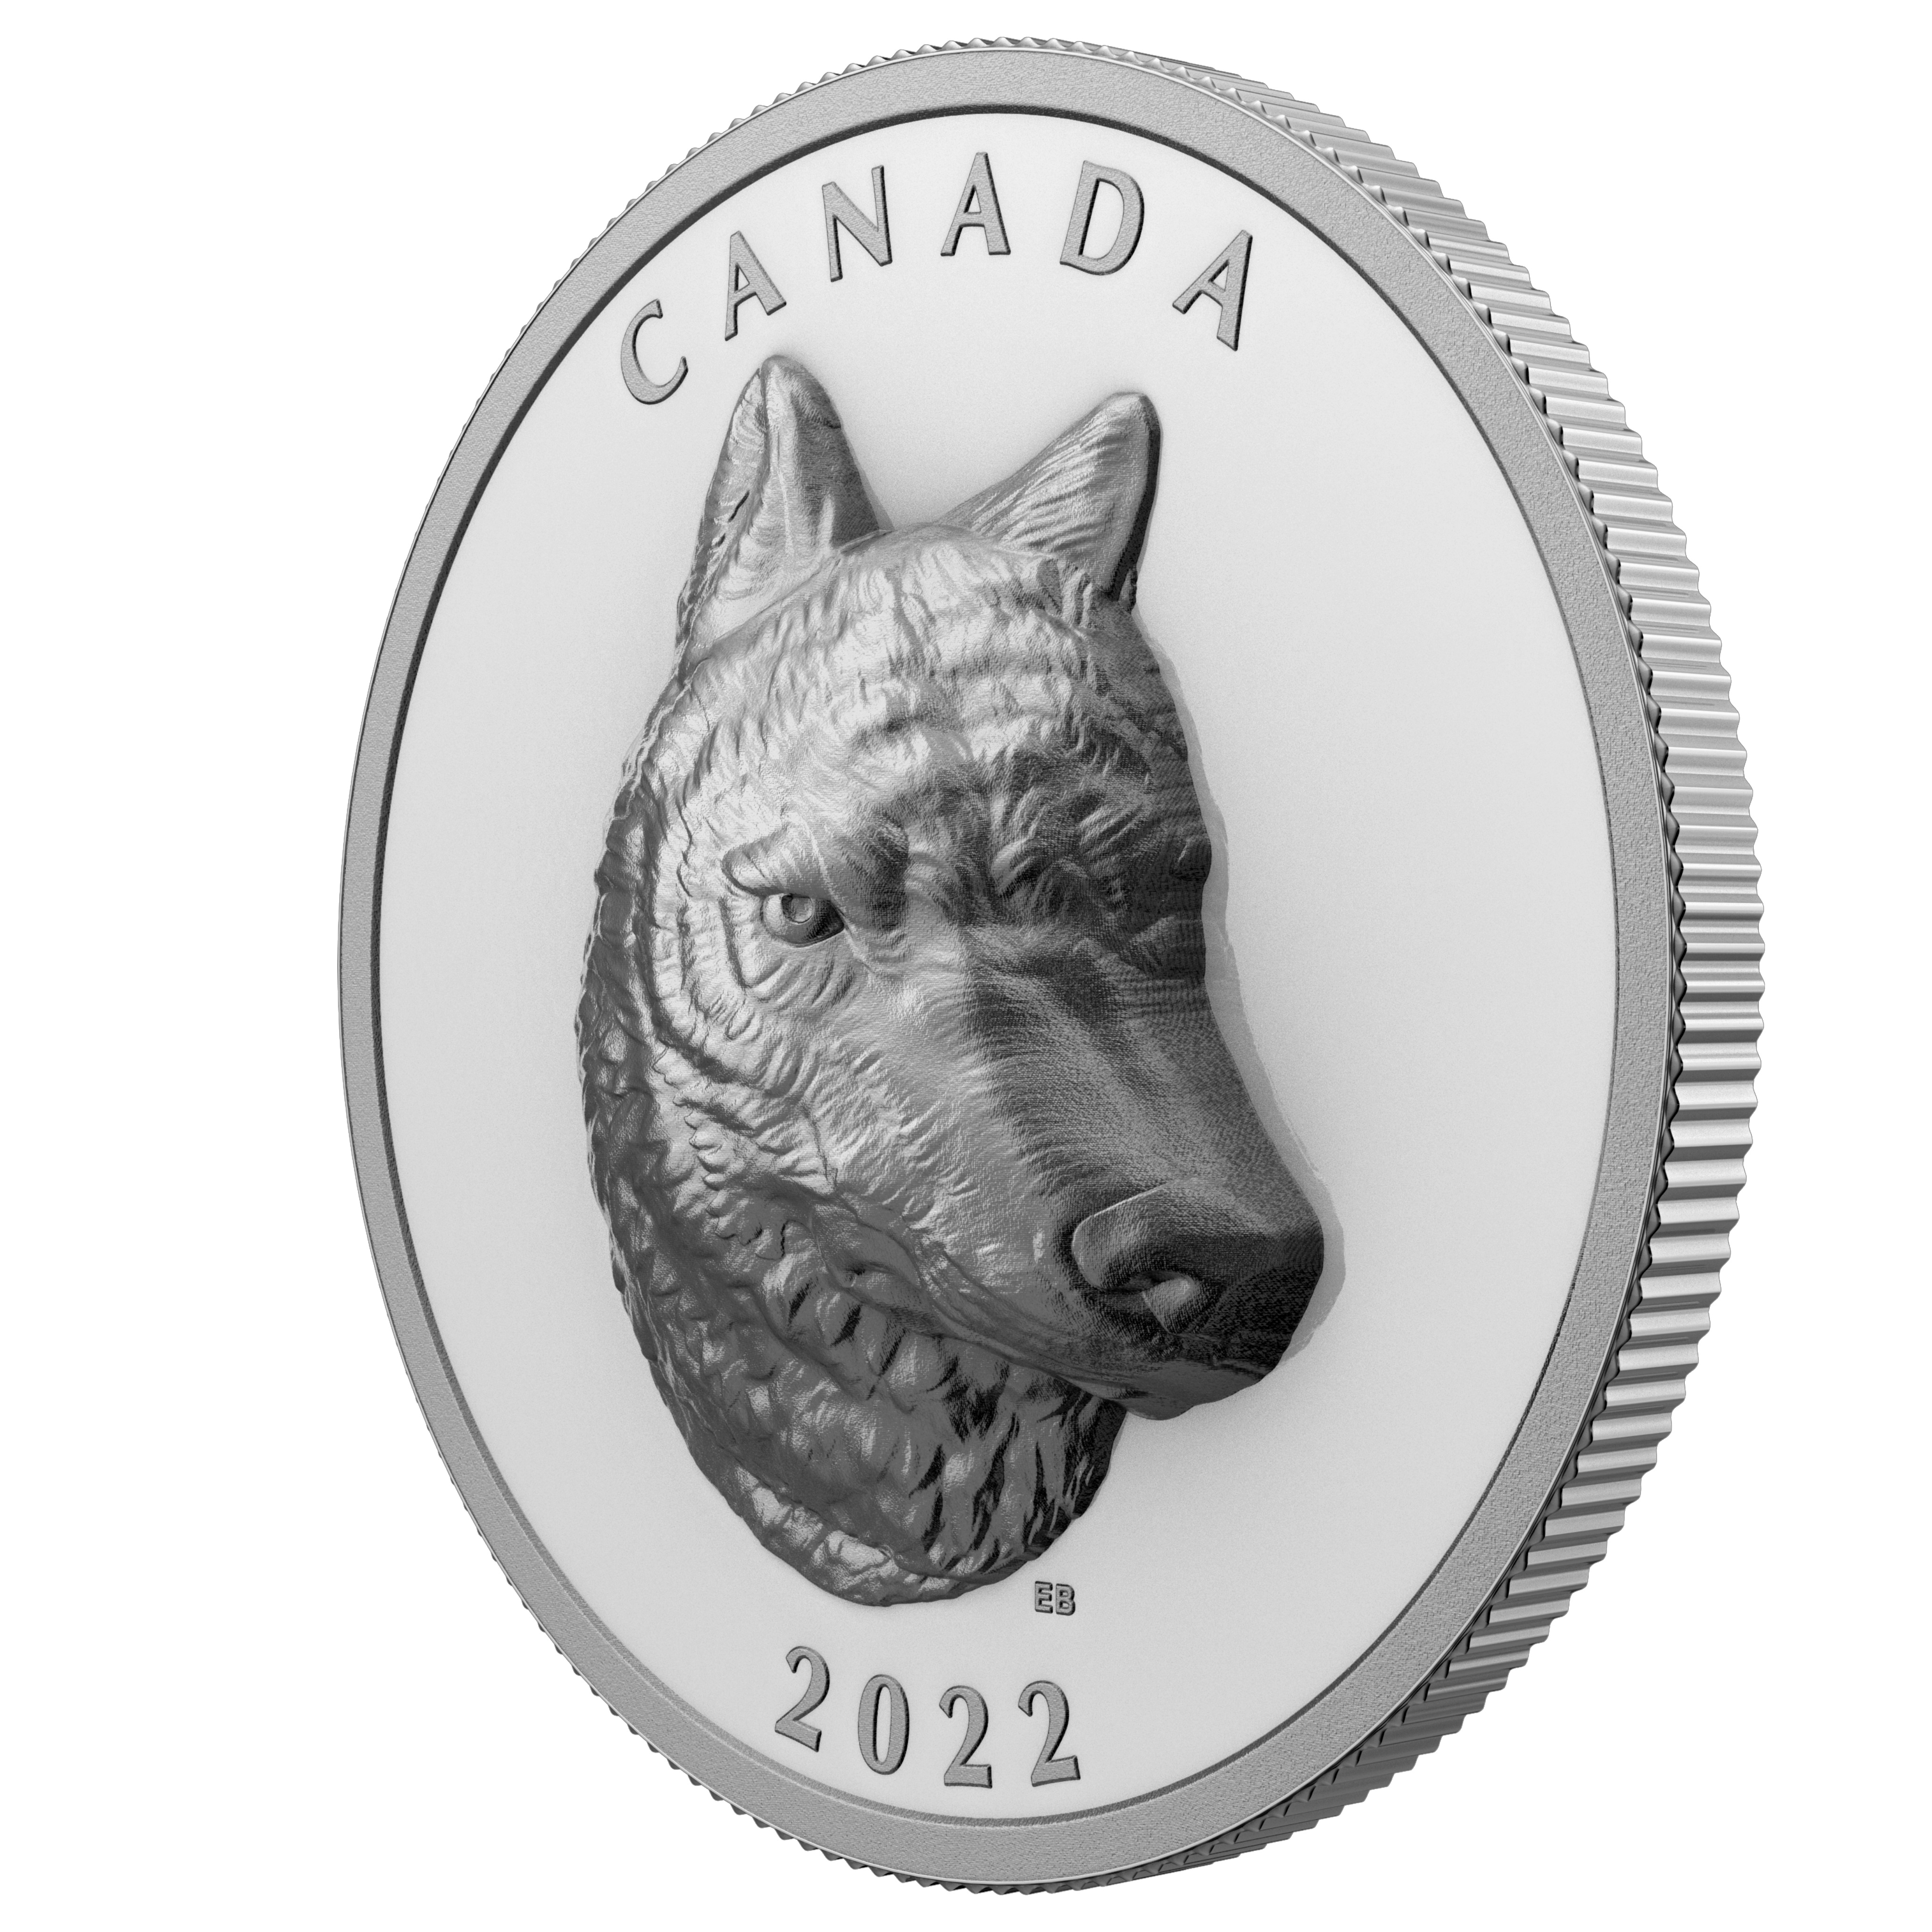 EXTRAORDINARILY HIGH RELIEF COINS -  TIMBER WOLF -  2022 CANADIAN COINS 03